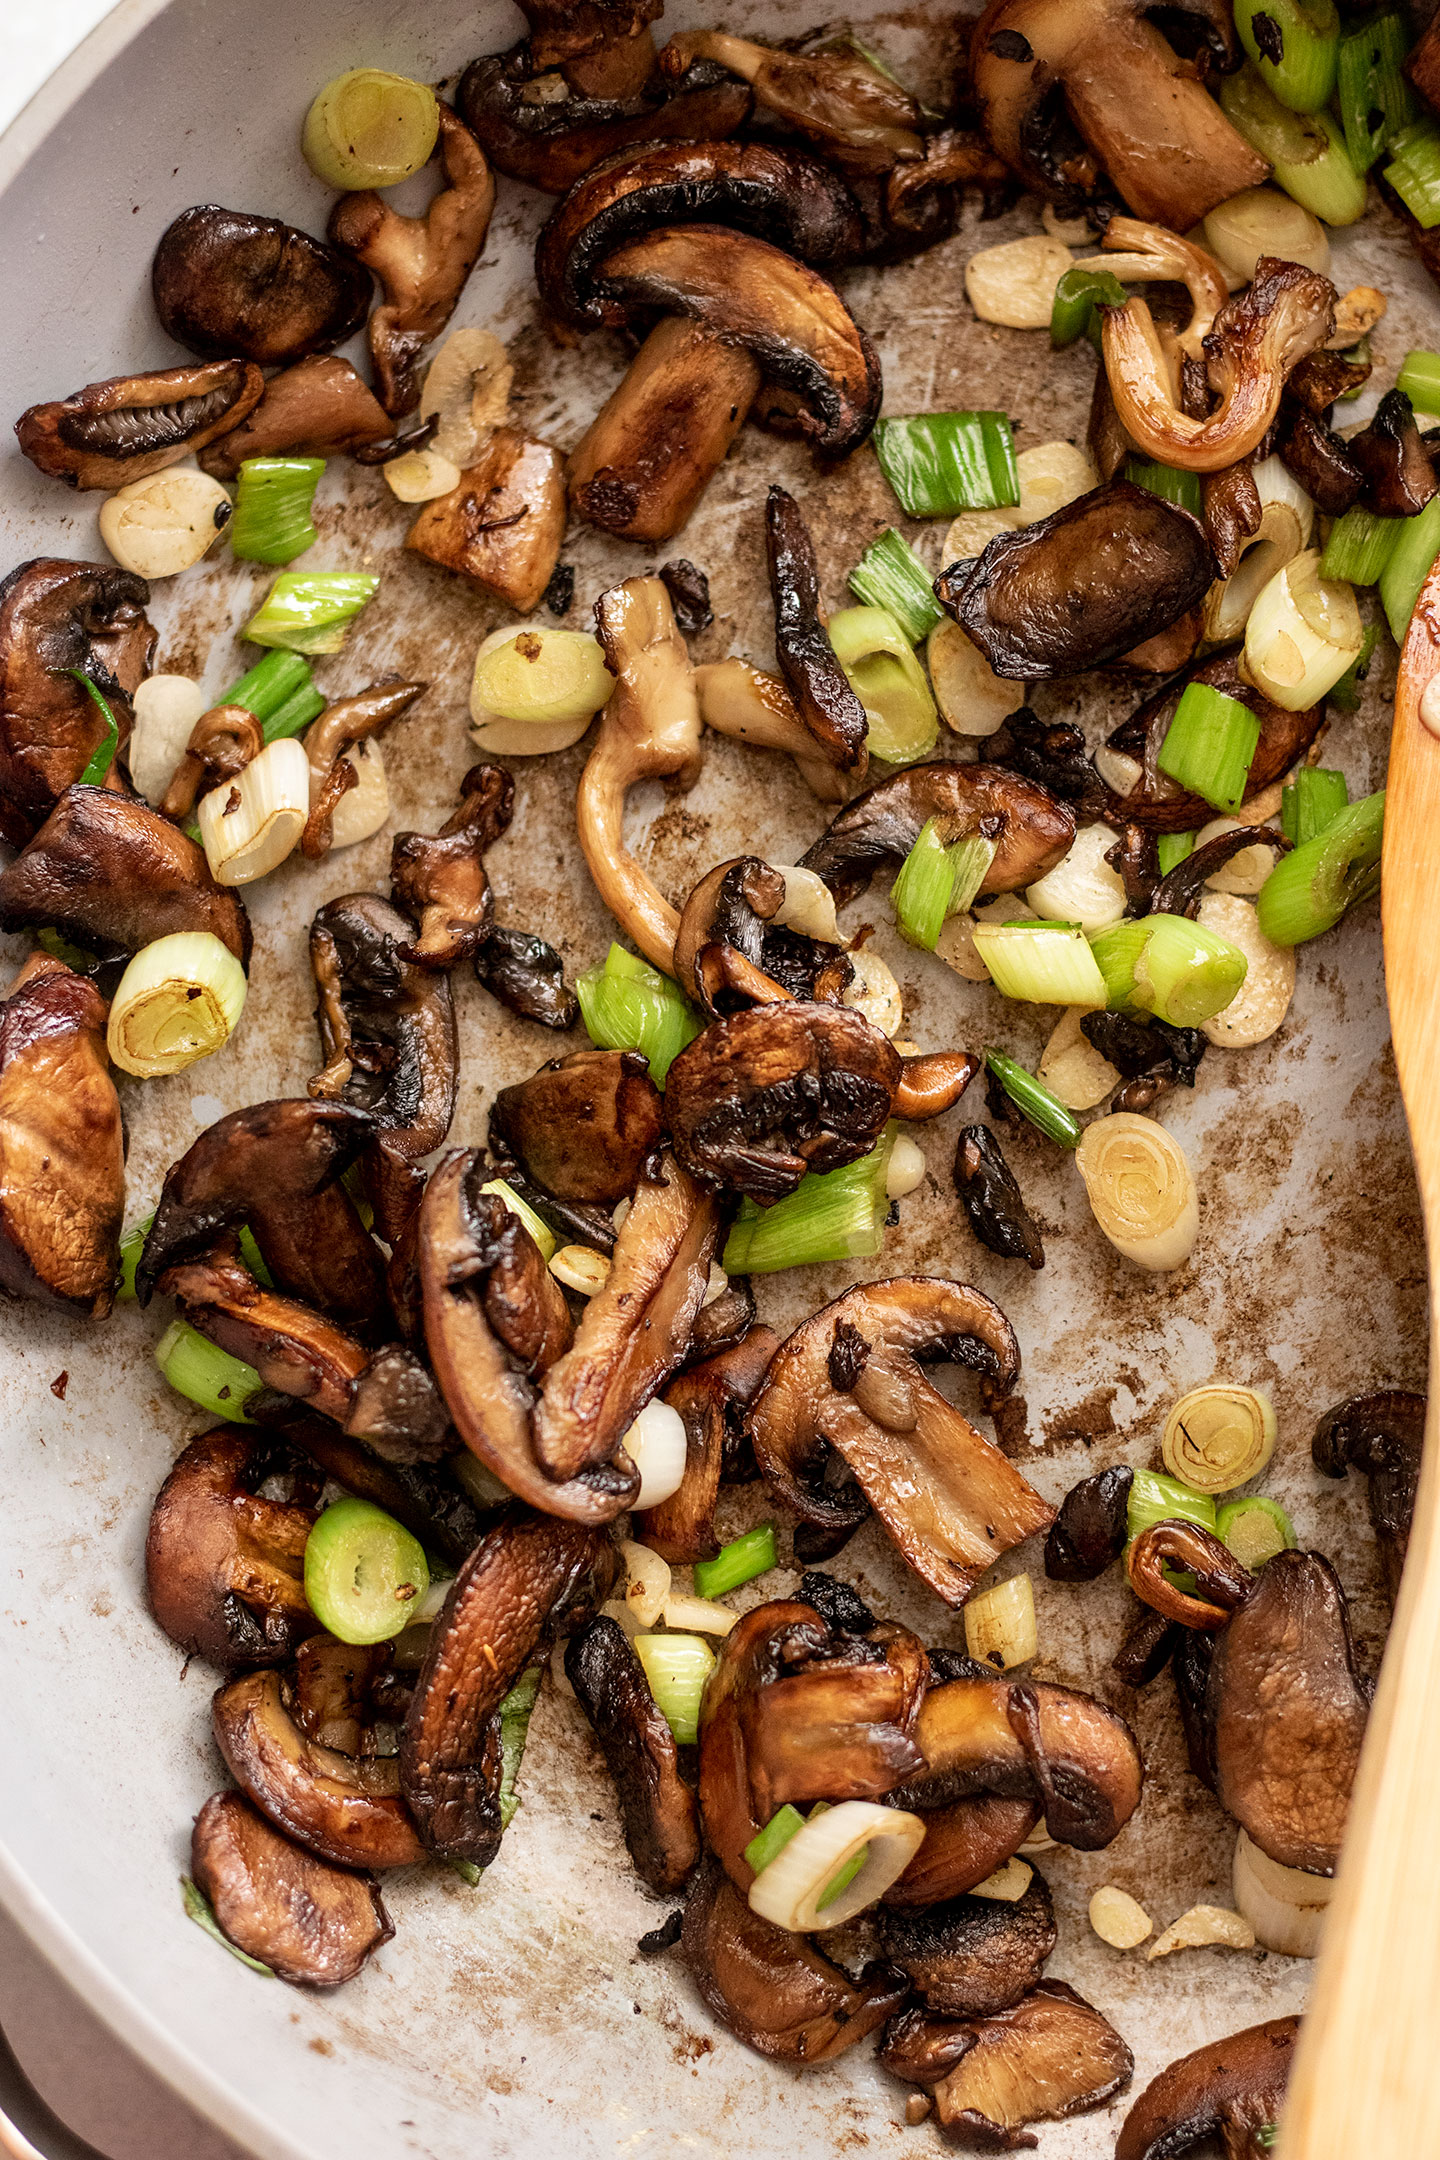 Pan filled with pan-fried mushrooms, scallions and garlic slices.